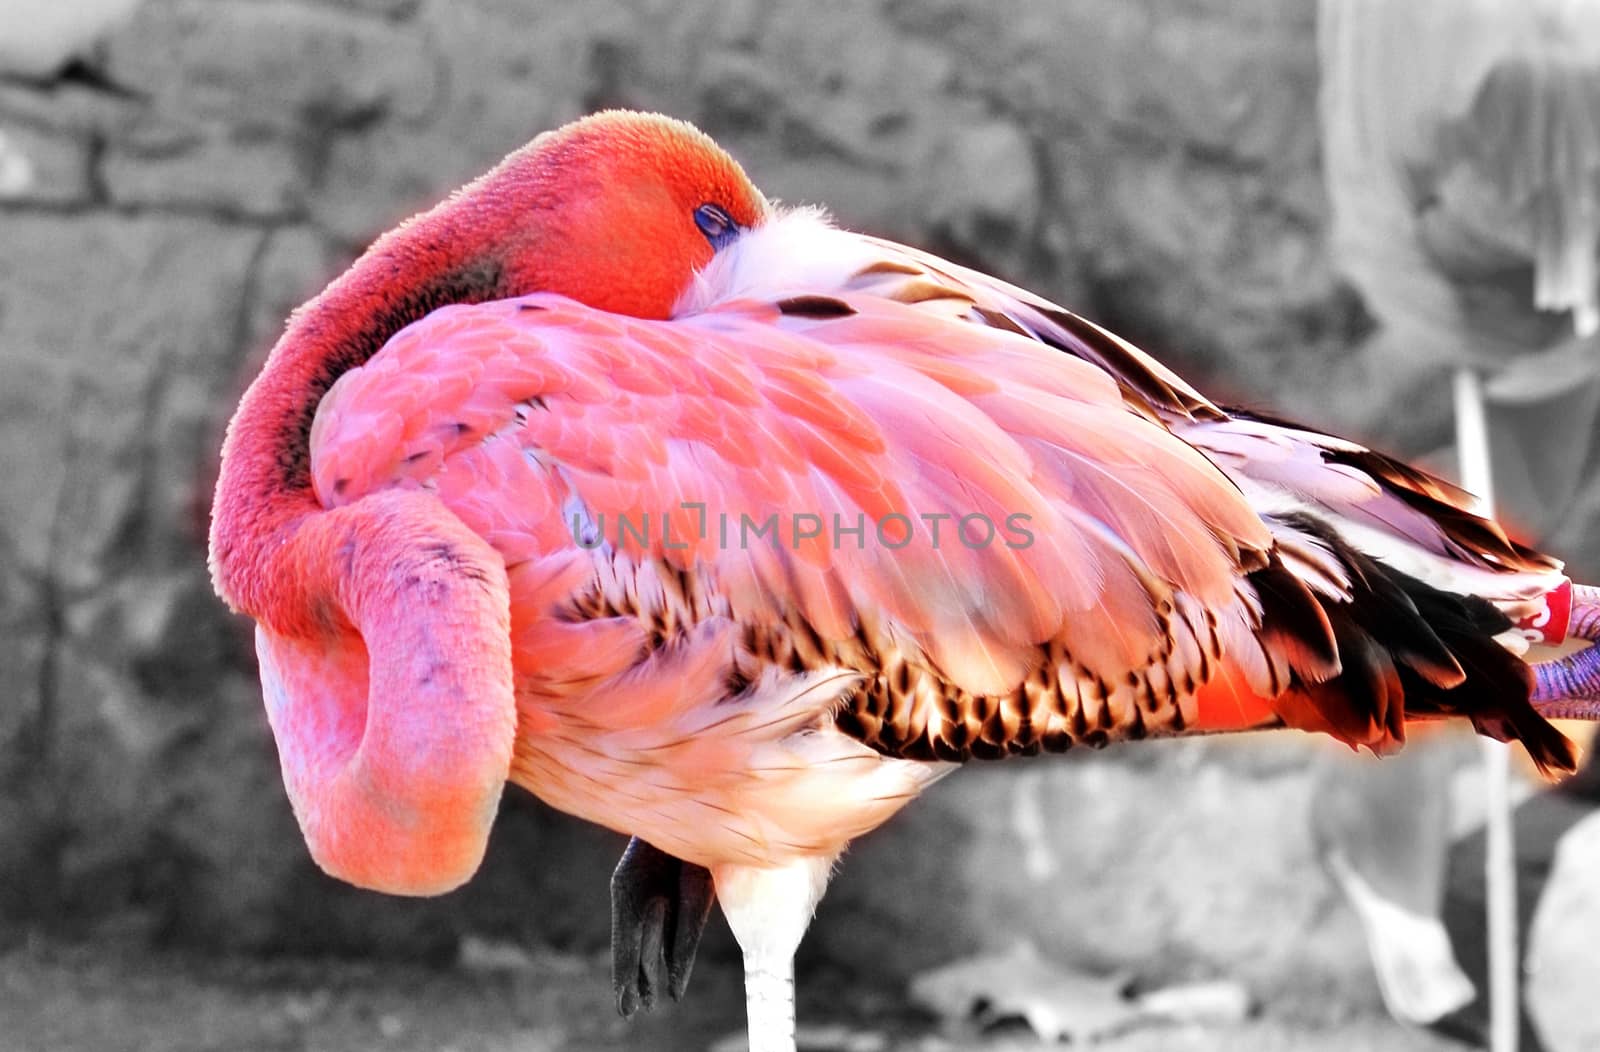 A brightly-colored flamingo against a gray background